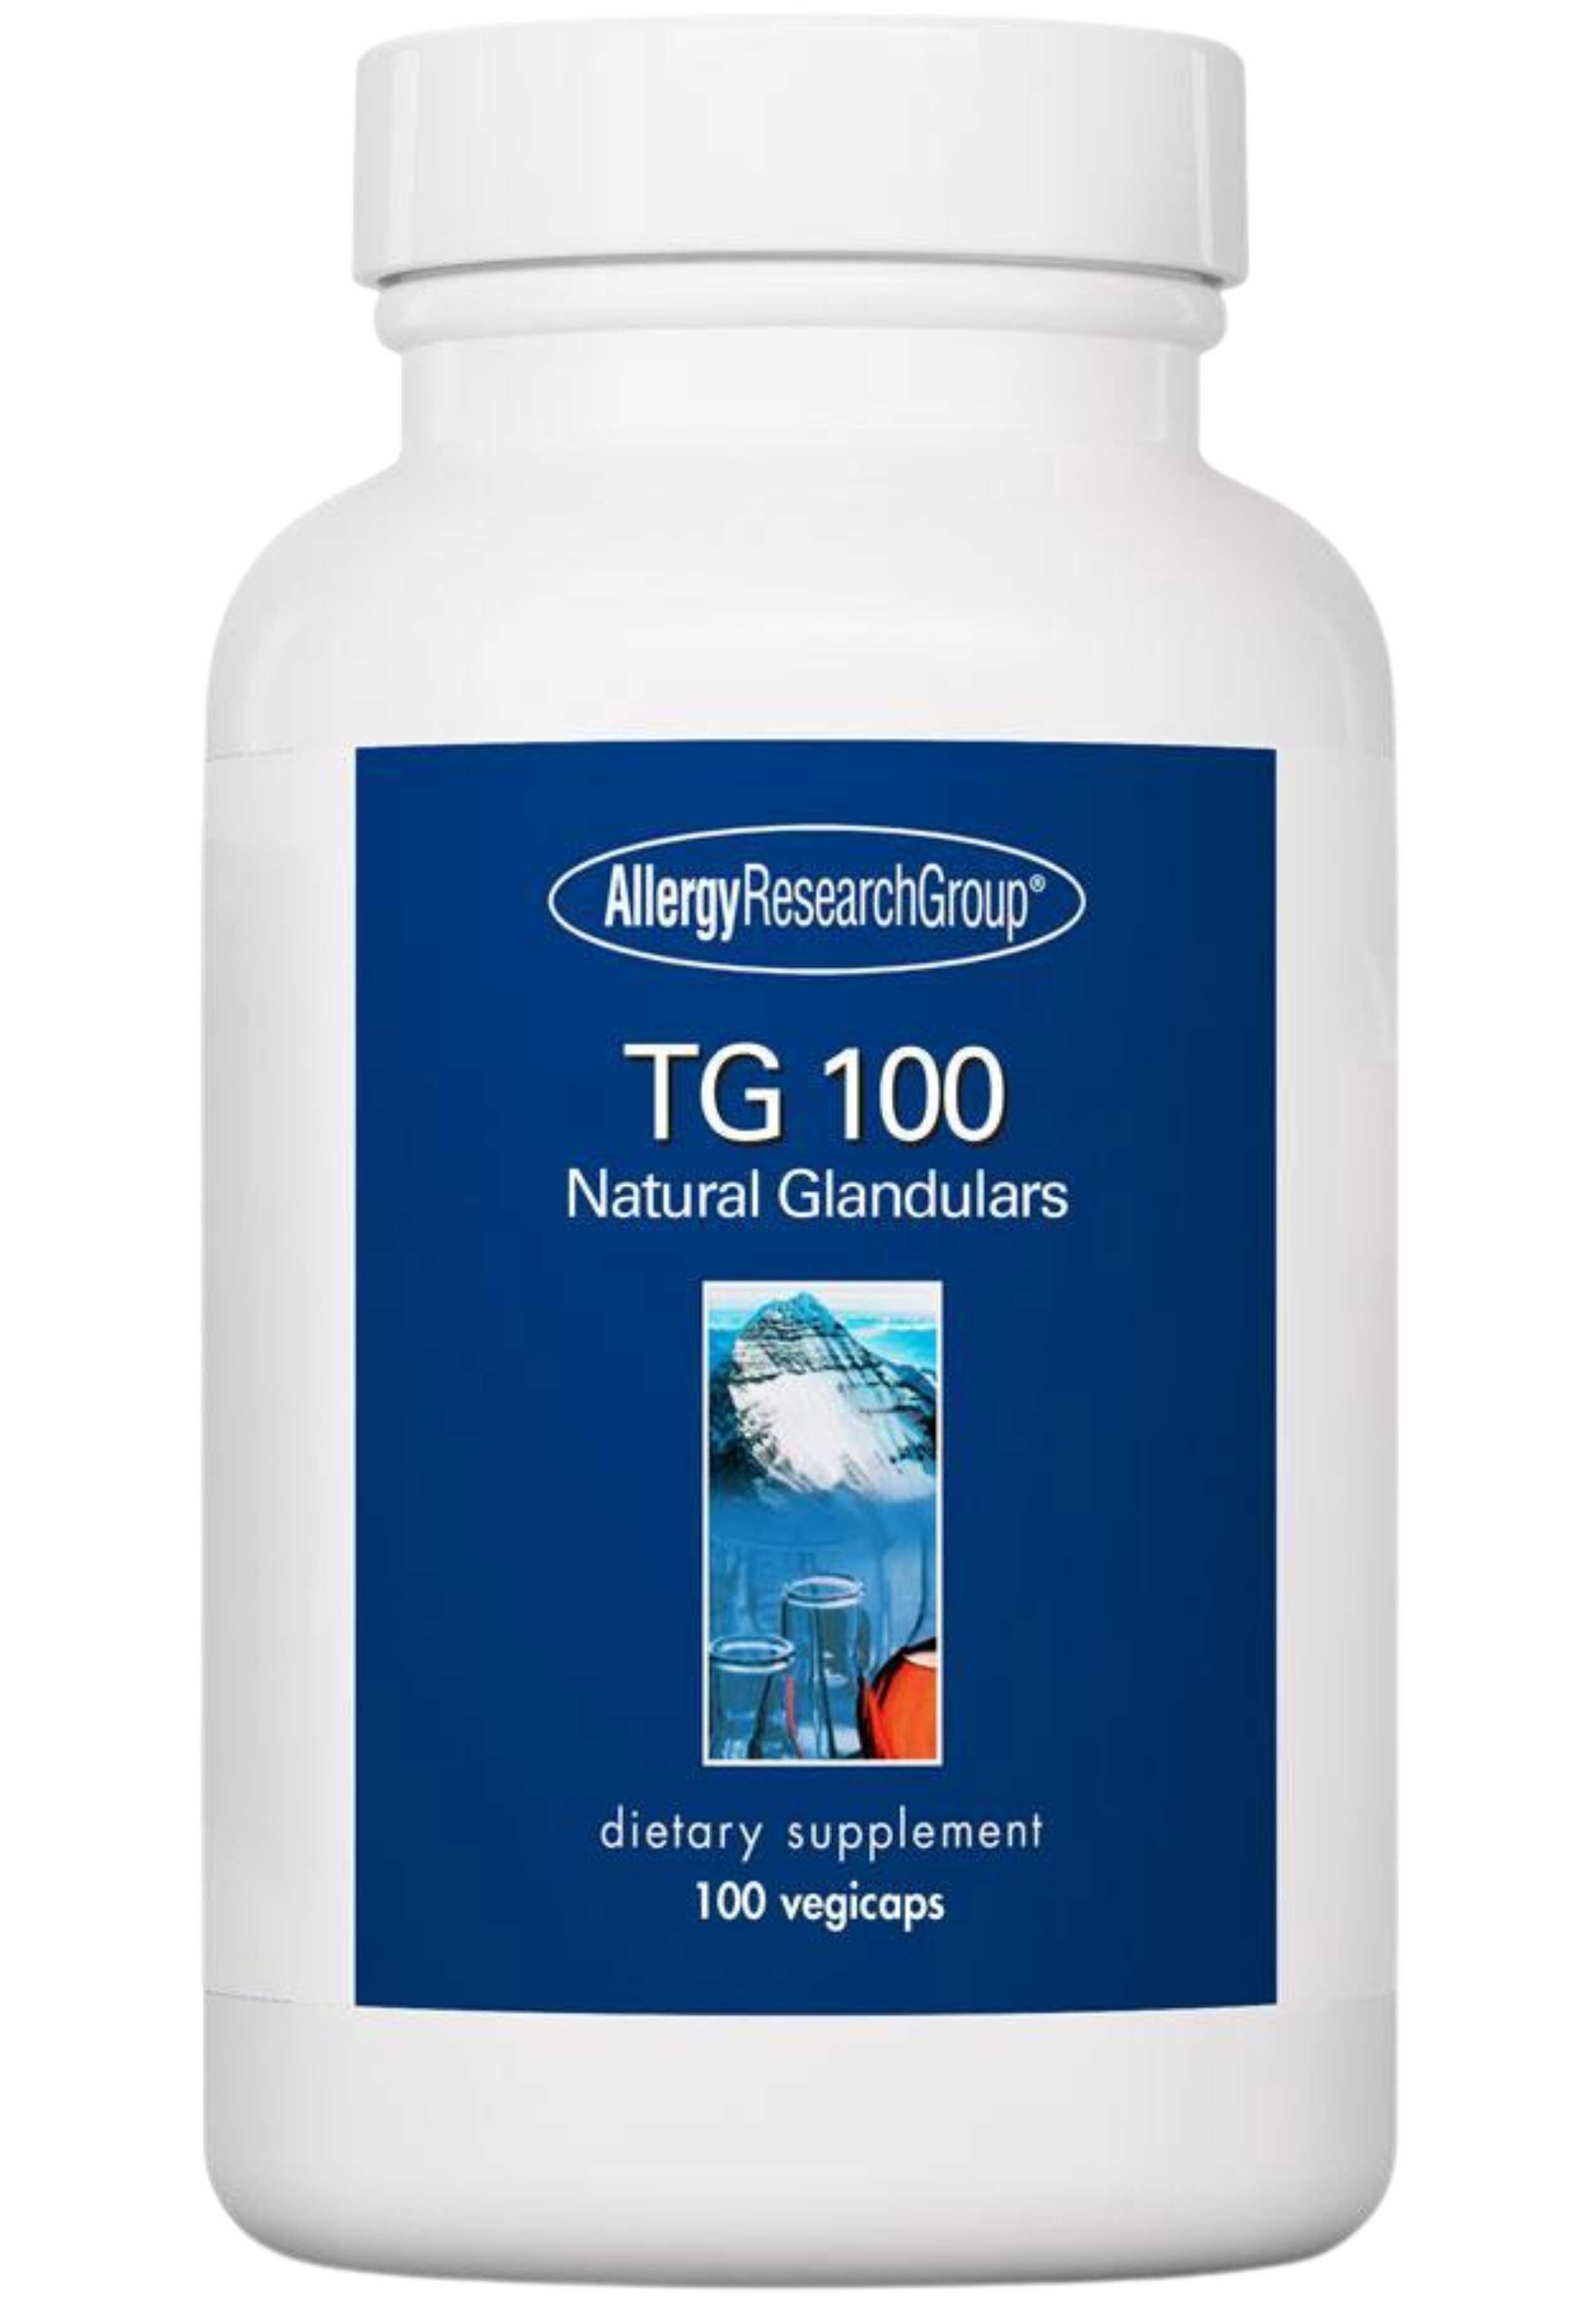 Allergy Research Group TG 100